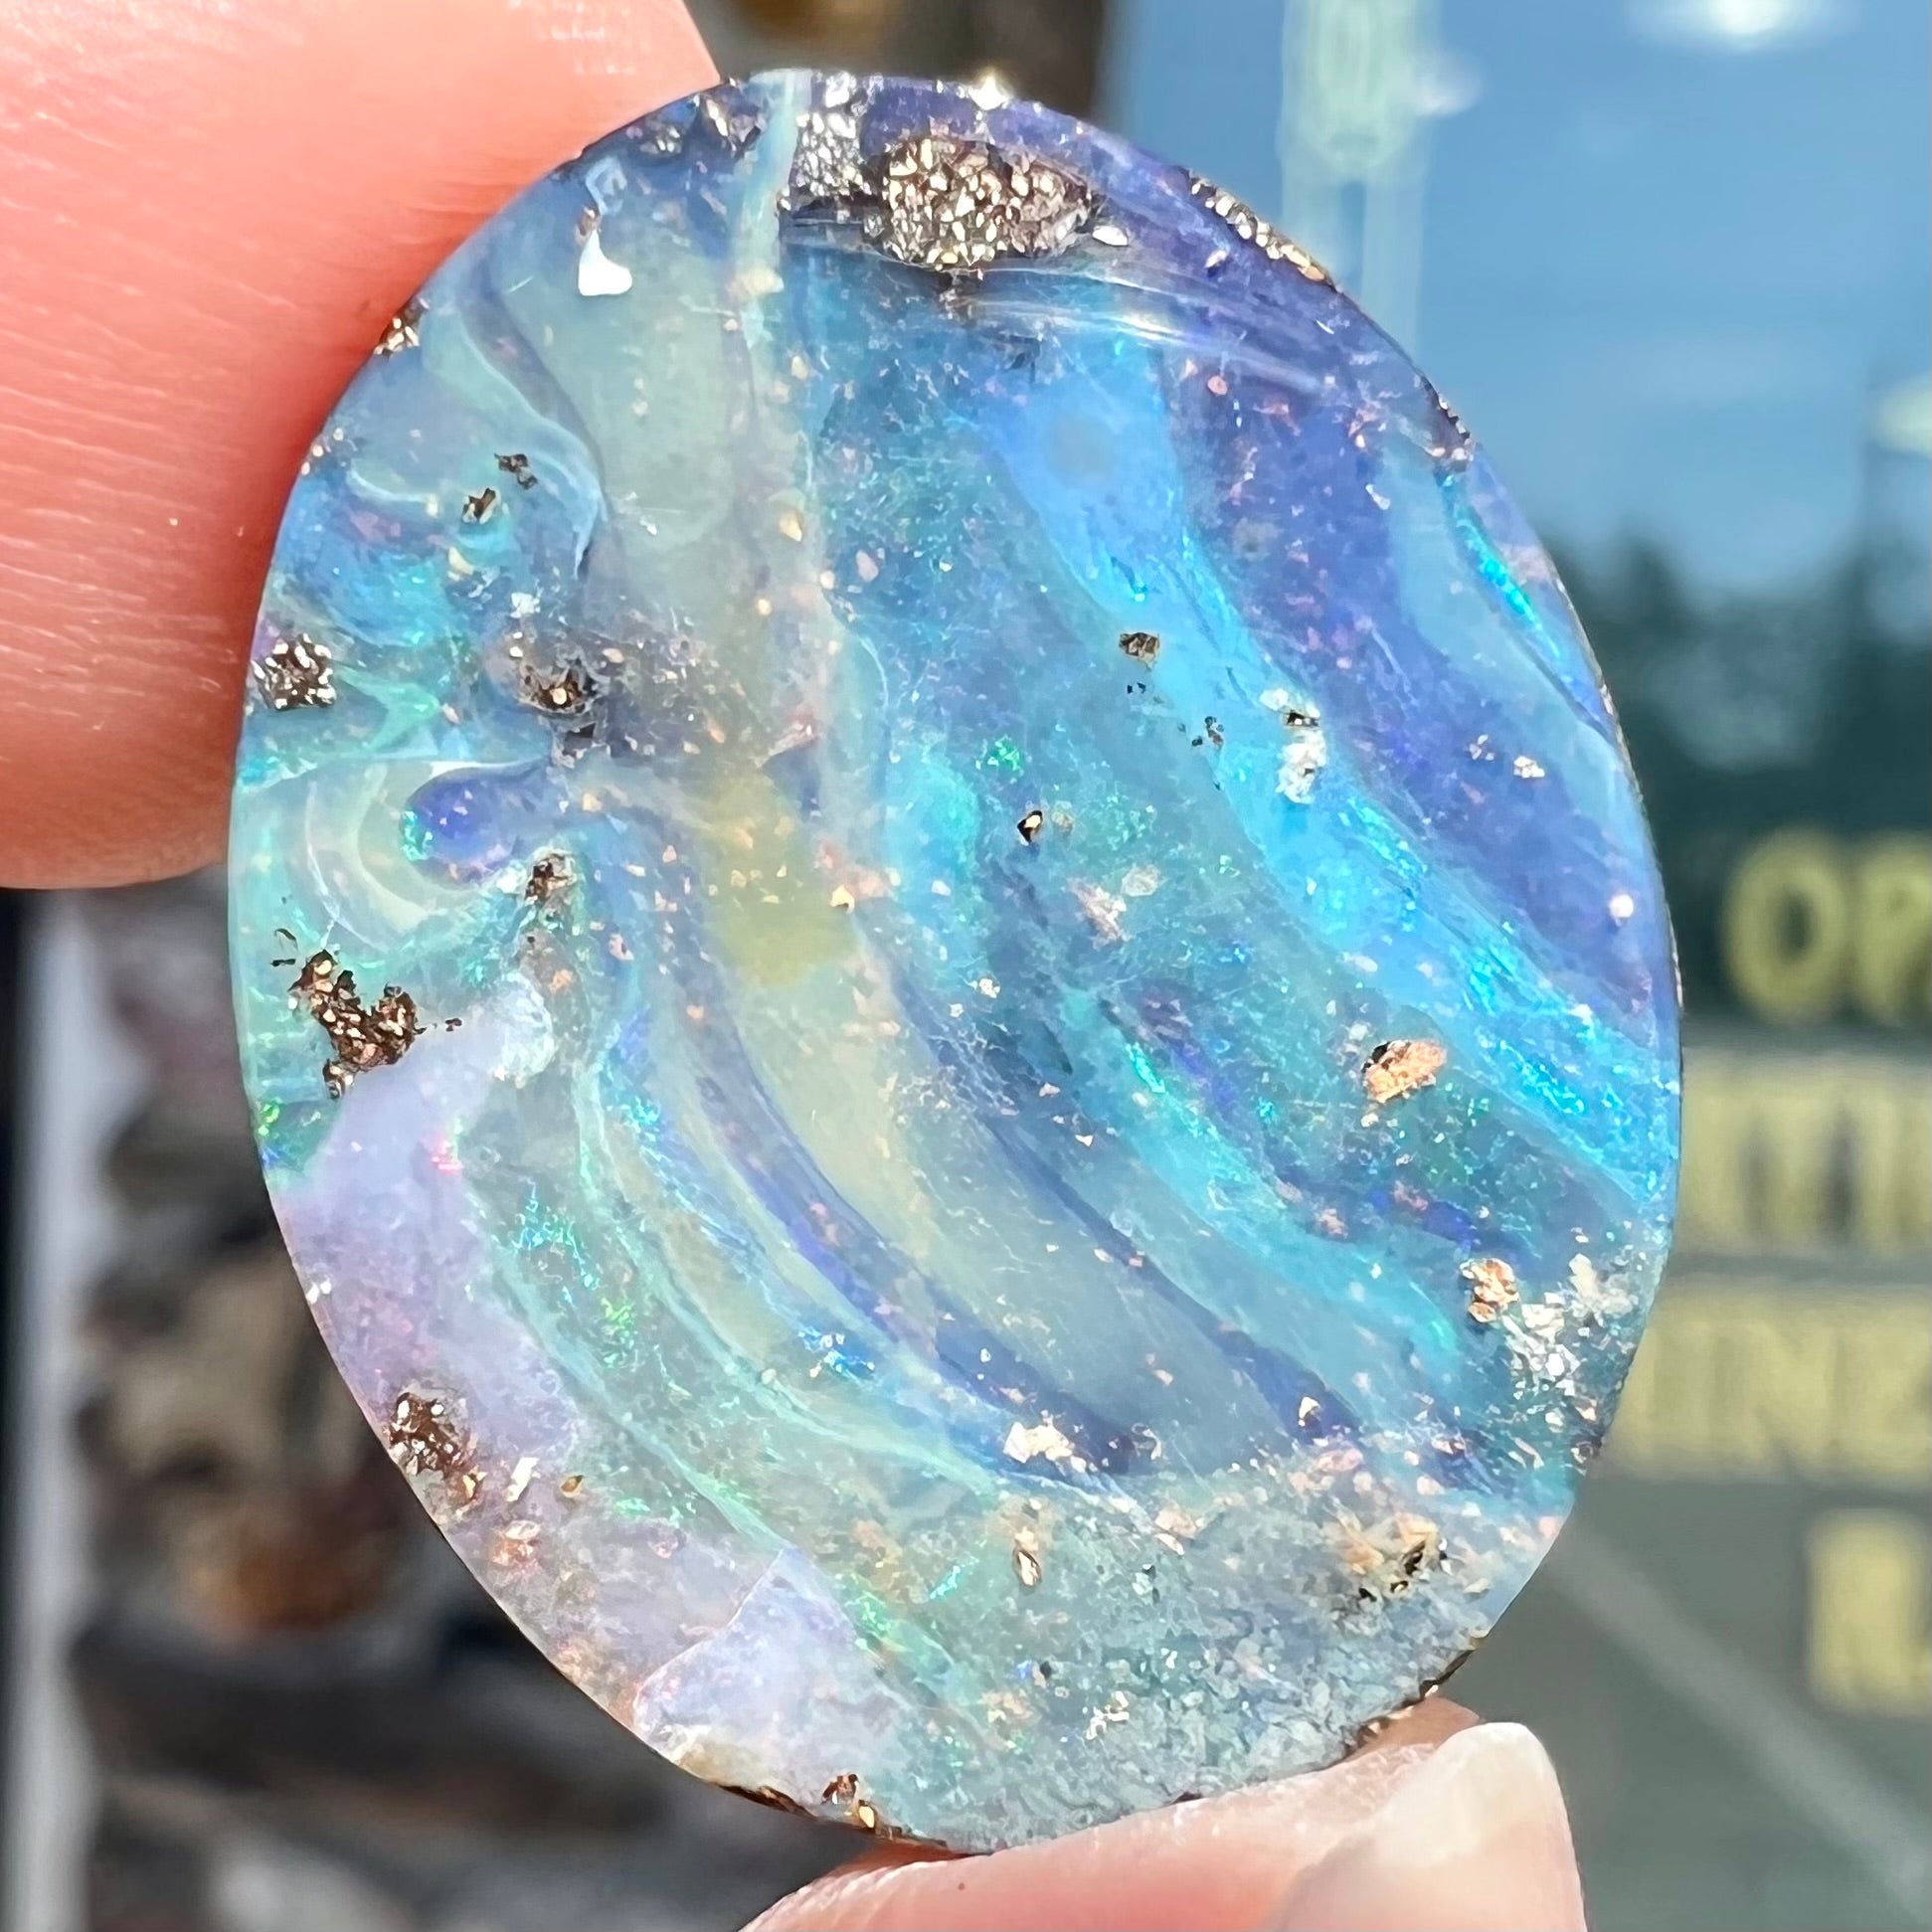 A loose, oval cabochon cut boulder opal stone from Queensland, Australia.  The stone is predominantly blue.